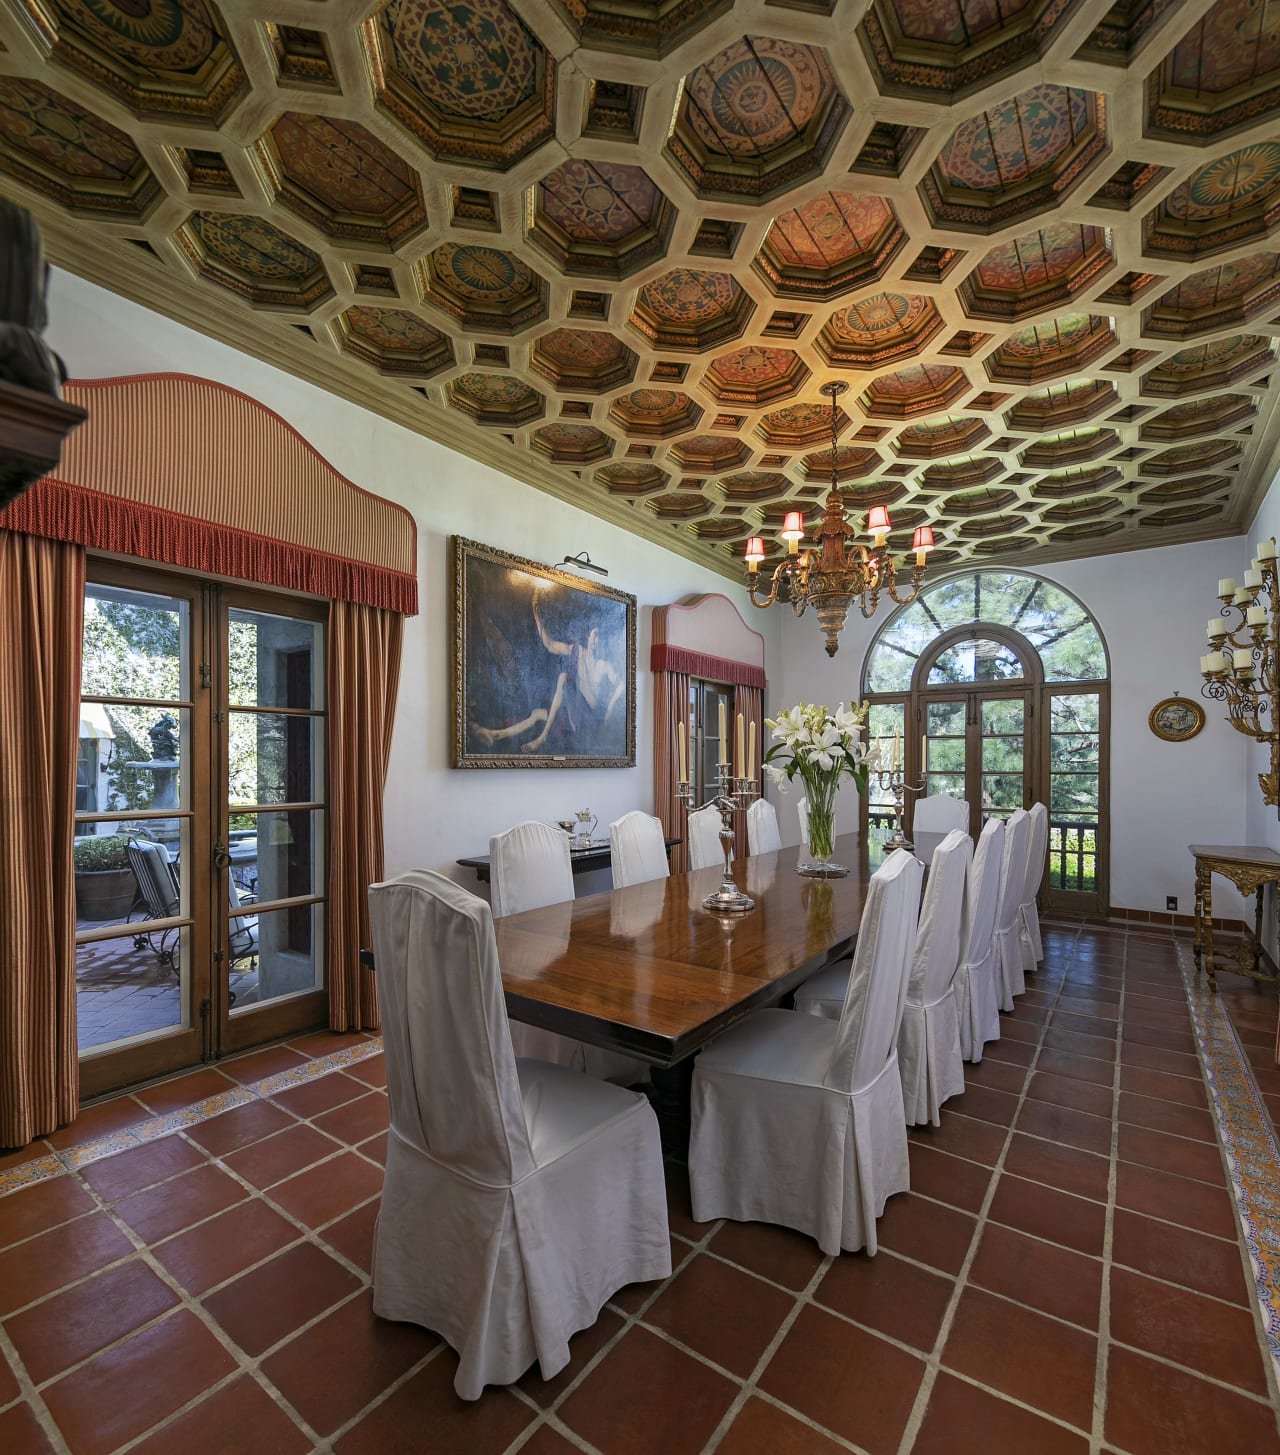 Francis York Castello del Lago: 1920s Spanish-Style Estate in the Hollywood Hills 25.jpeg